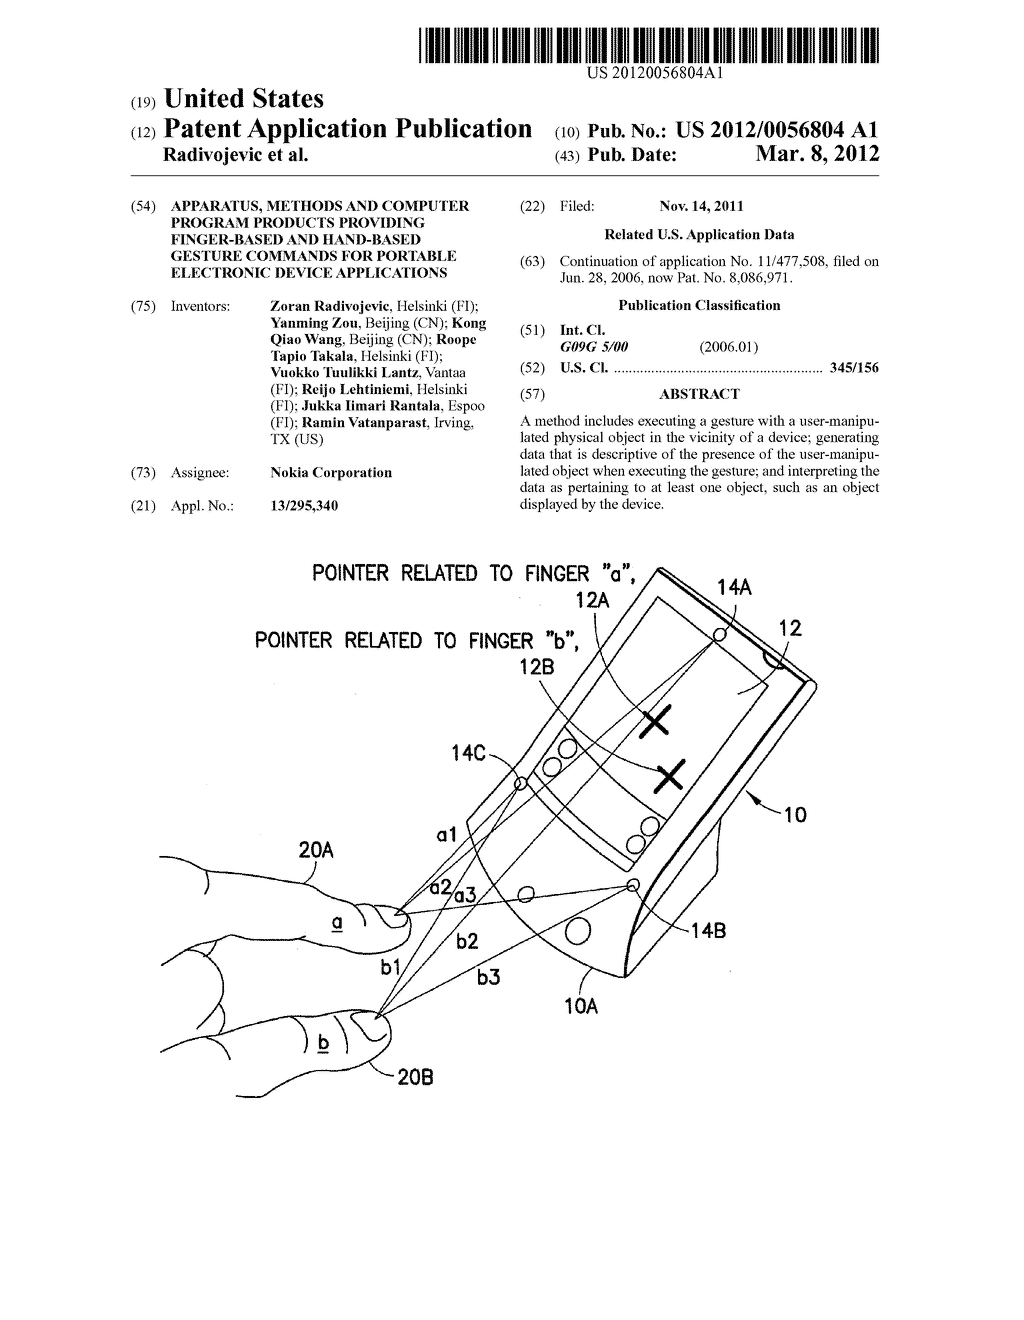 Apparatus, Methods And Computer Program Products Providing Finger-Based     And Hand-Based Gesture Commands For Portable Electronic Device     Applications - diagram, schematic, and image 01